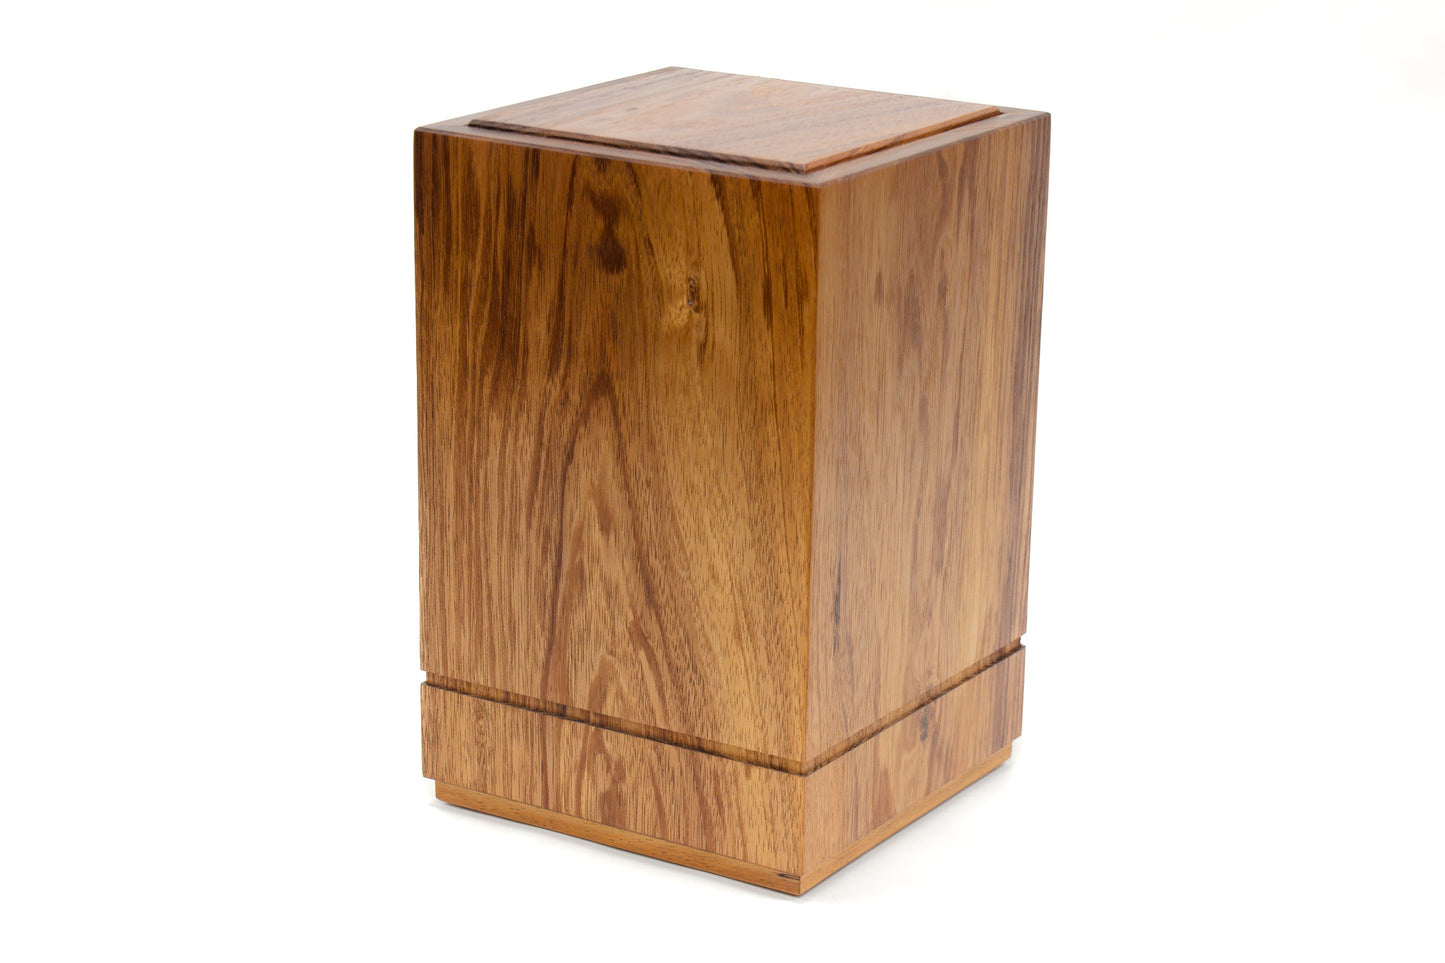 Wooden cremation urn handcrafted from Tasmanian Blackwood